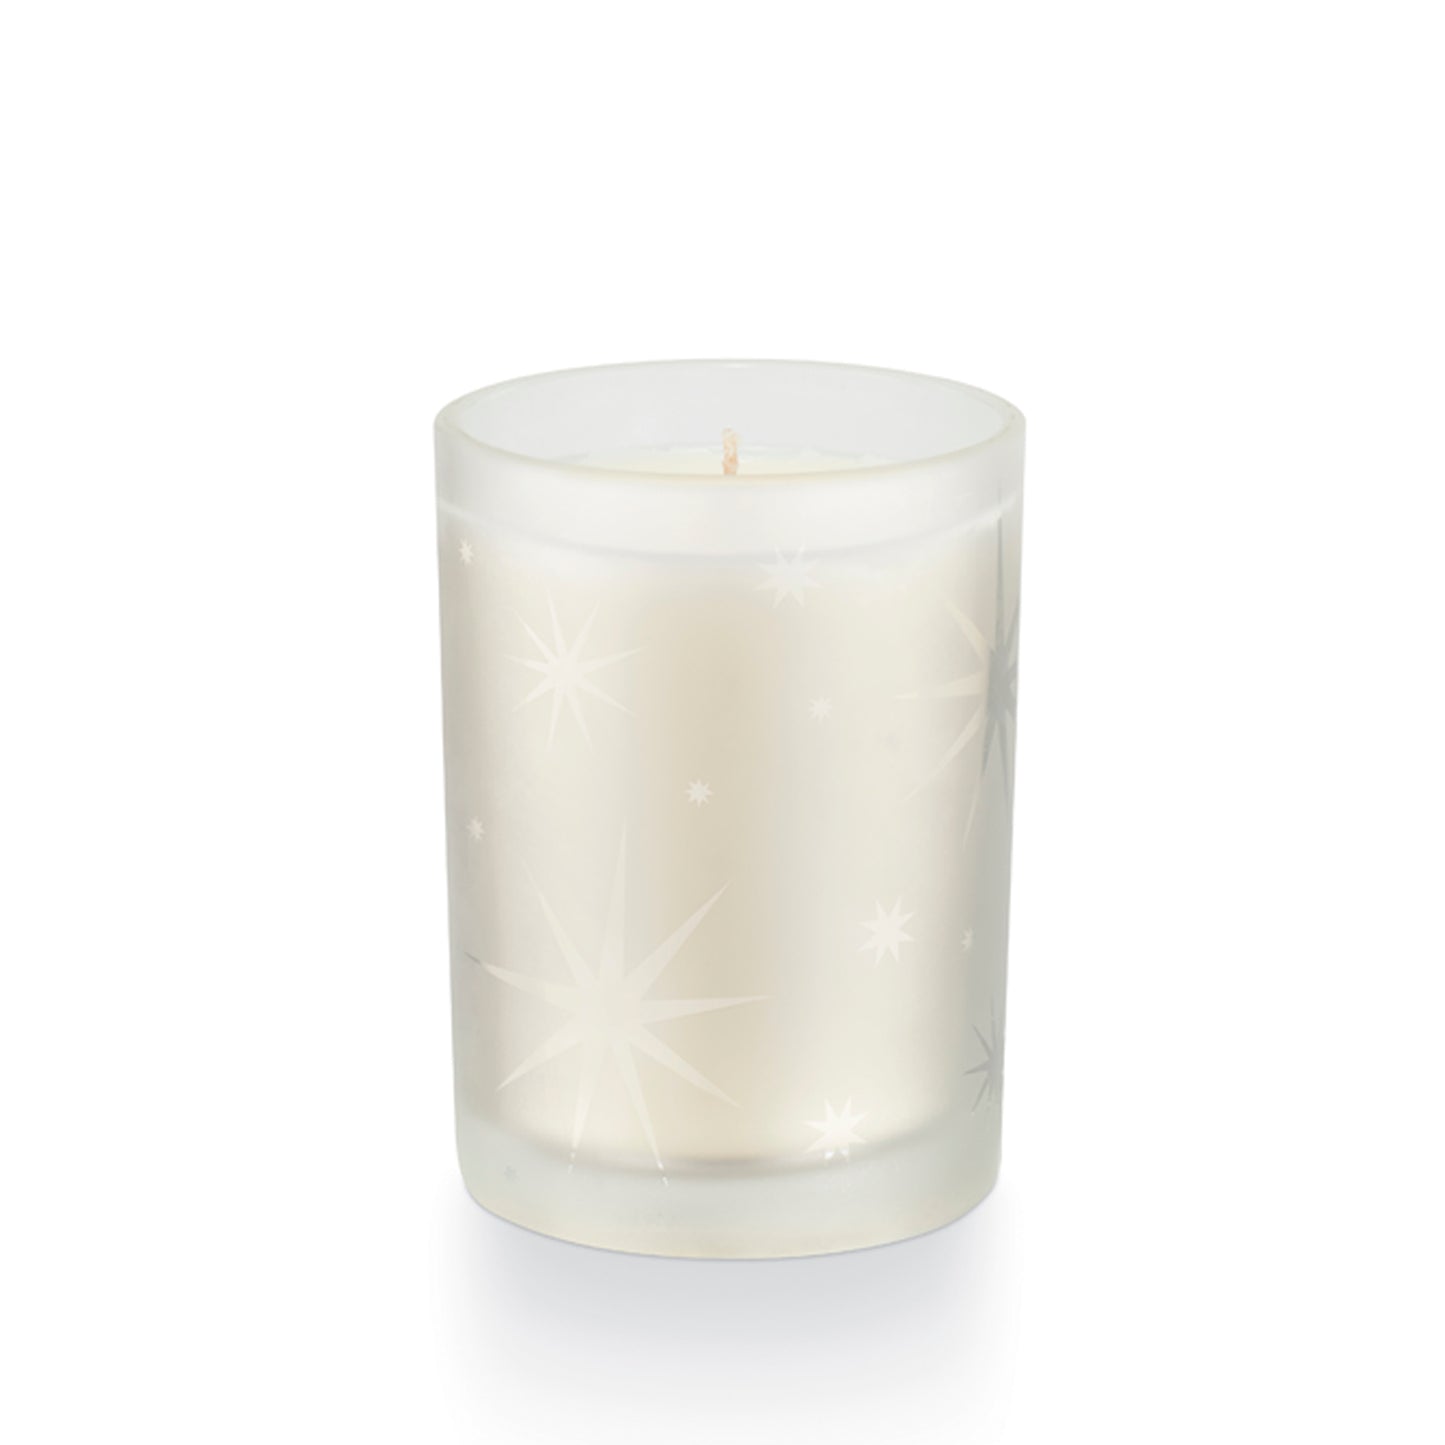 9.2oz. Boxed Glass Candle